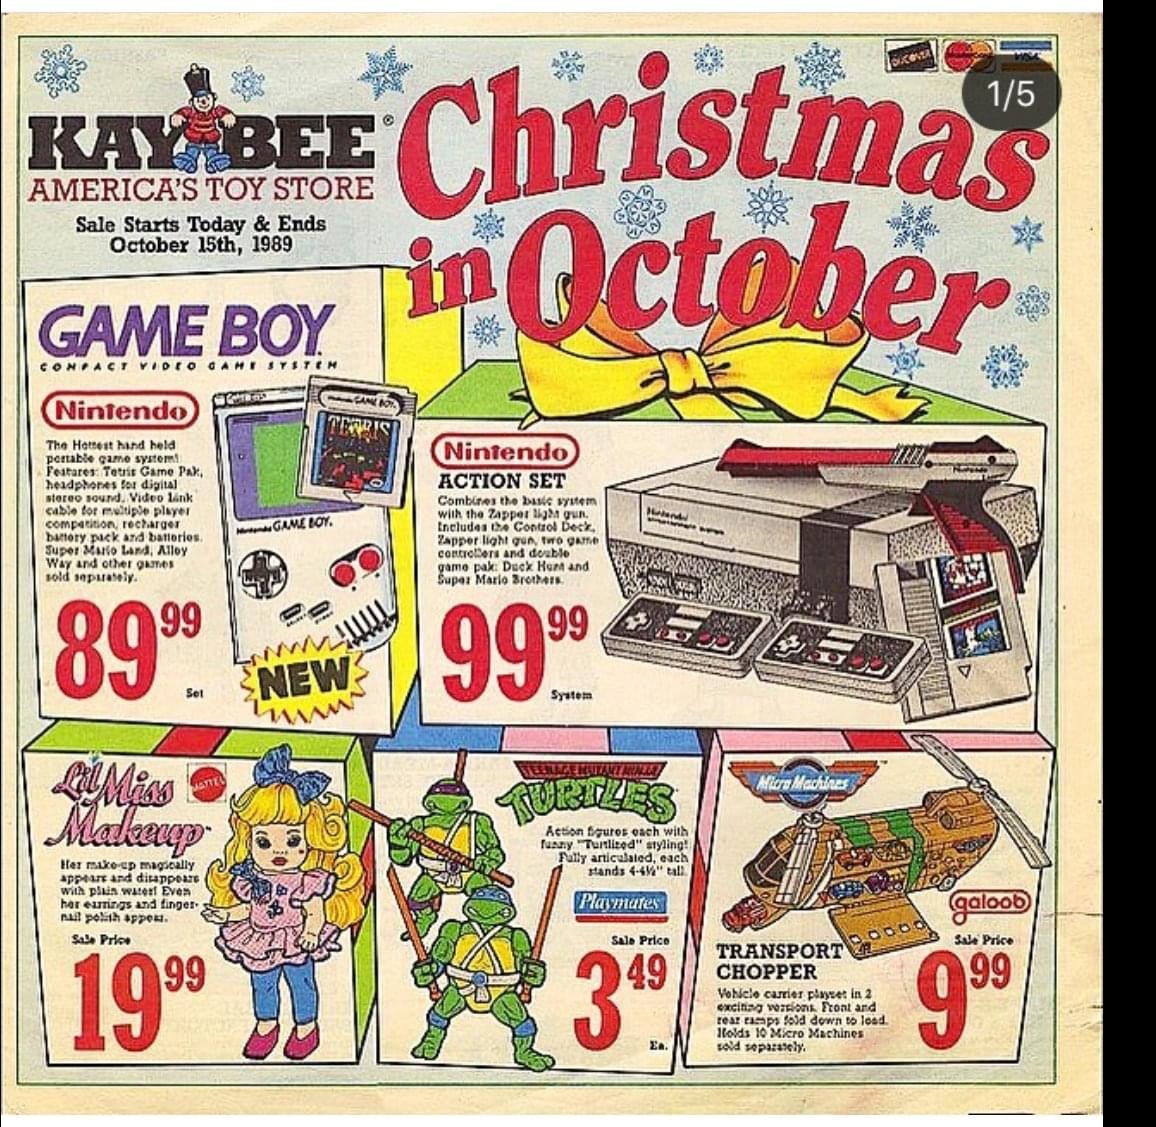 game boy - 15 stmas Kay Bee America'S Toy Store Sale Starts Today & Ends October 15th, 1969 in October Game Boy . Nintendo Action Set 8999 9.999 Come Gorus galoob Transport Chopper